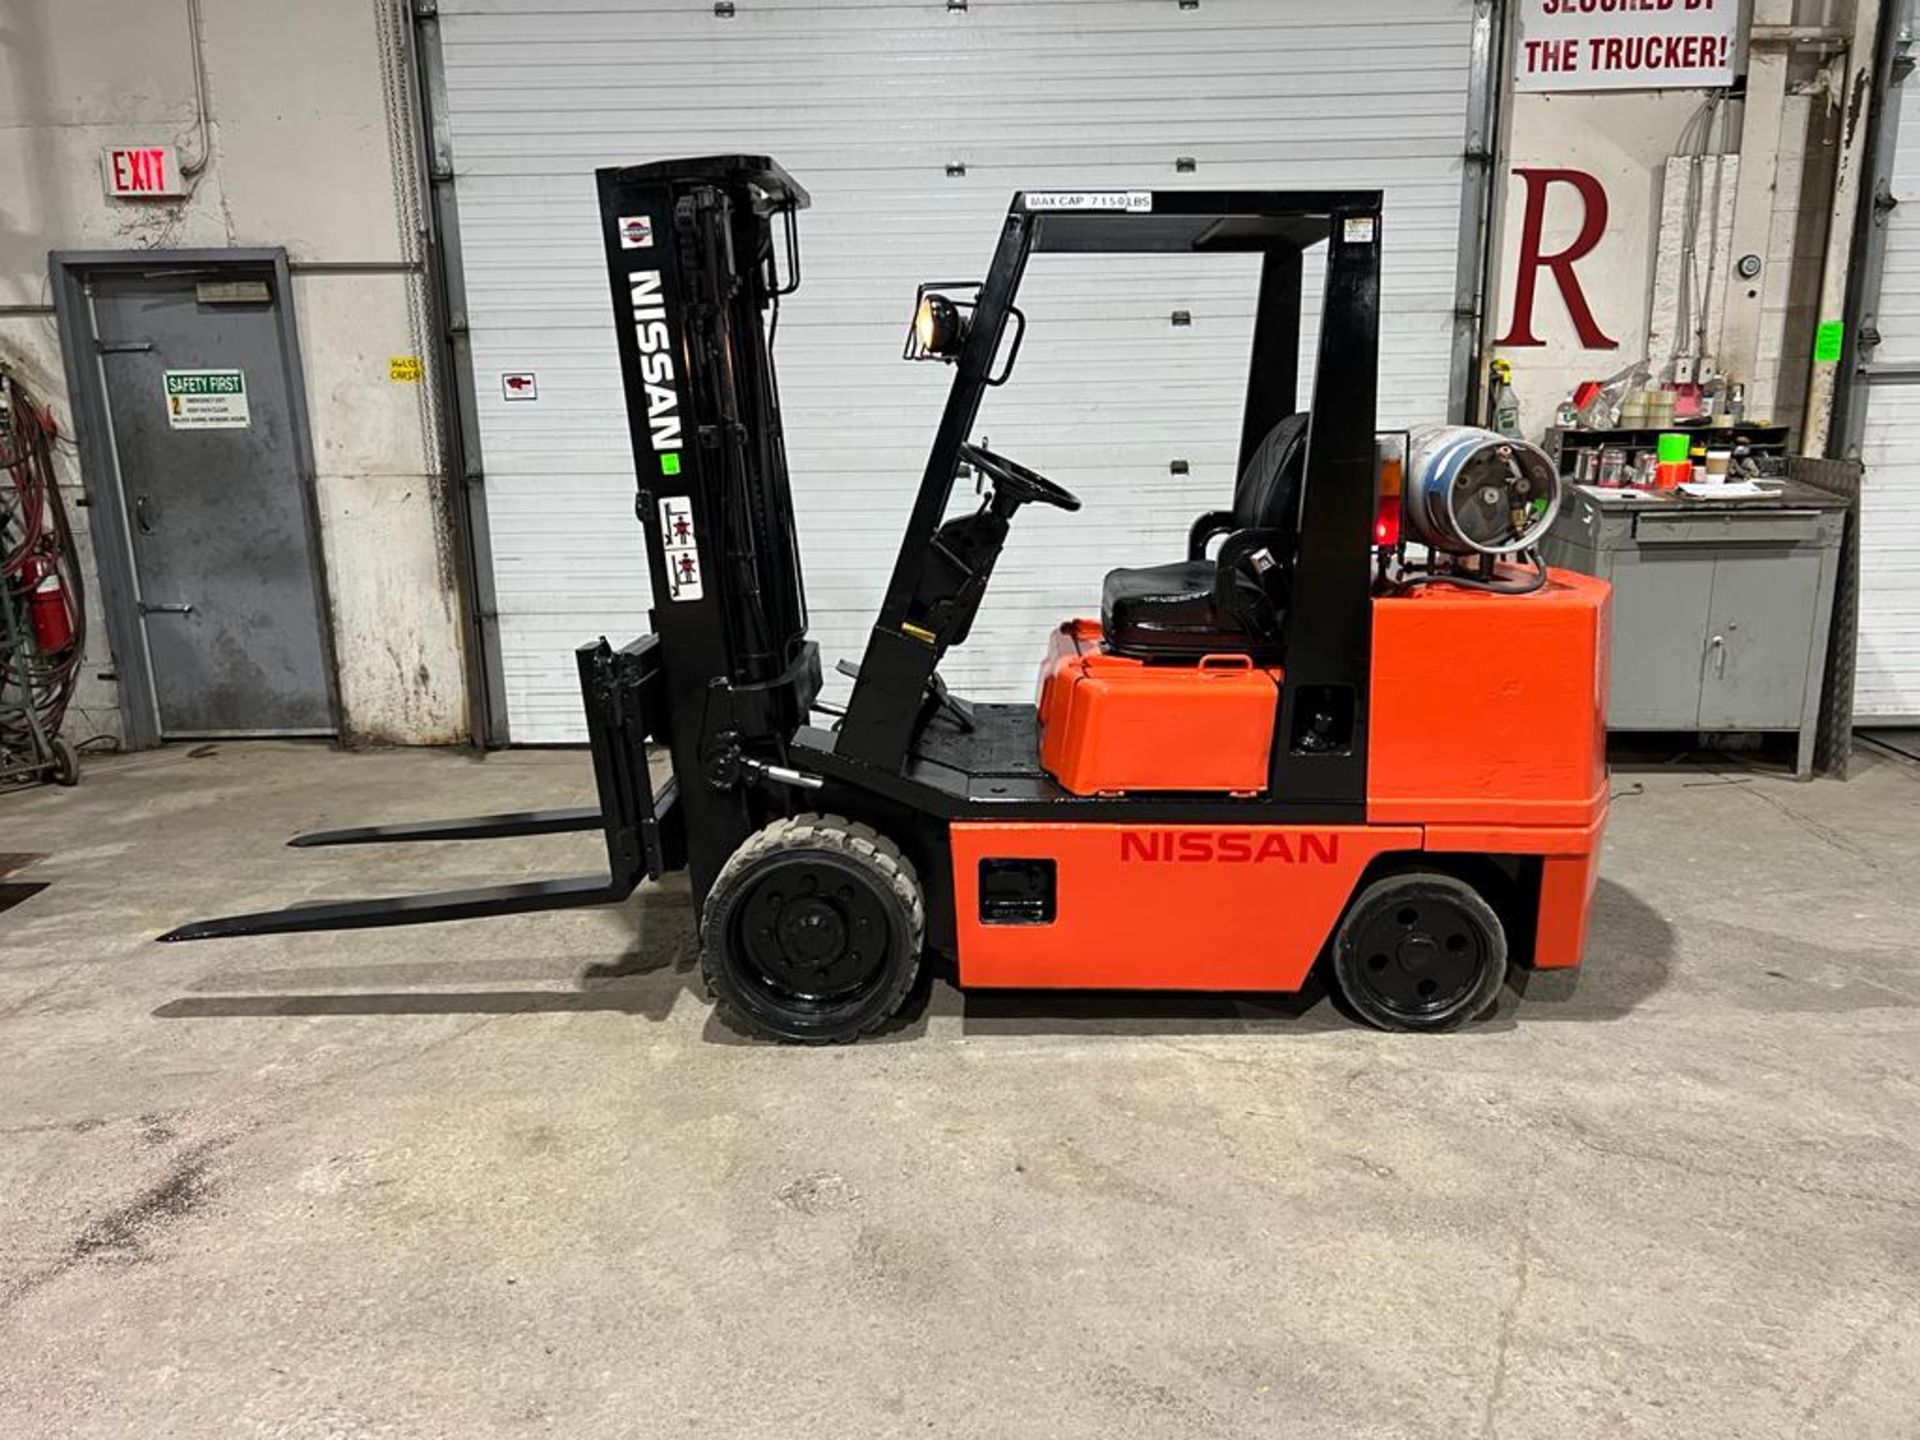 NICE Nissan 7,150lbs Capacity Forklift LPG (propane) with Sideshift 3-stage mast and LOW HOURS